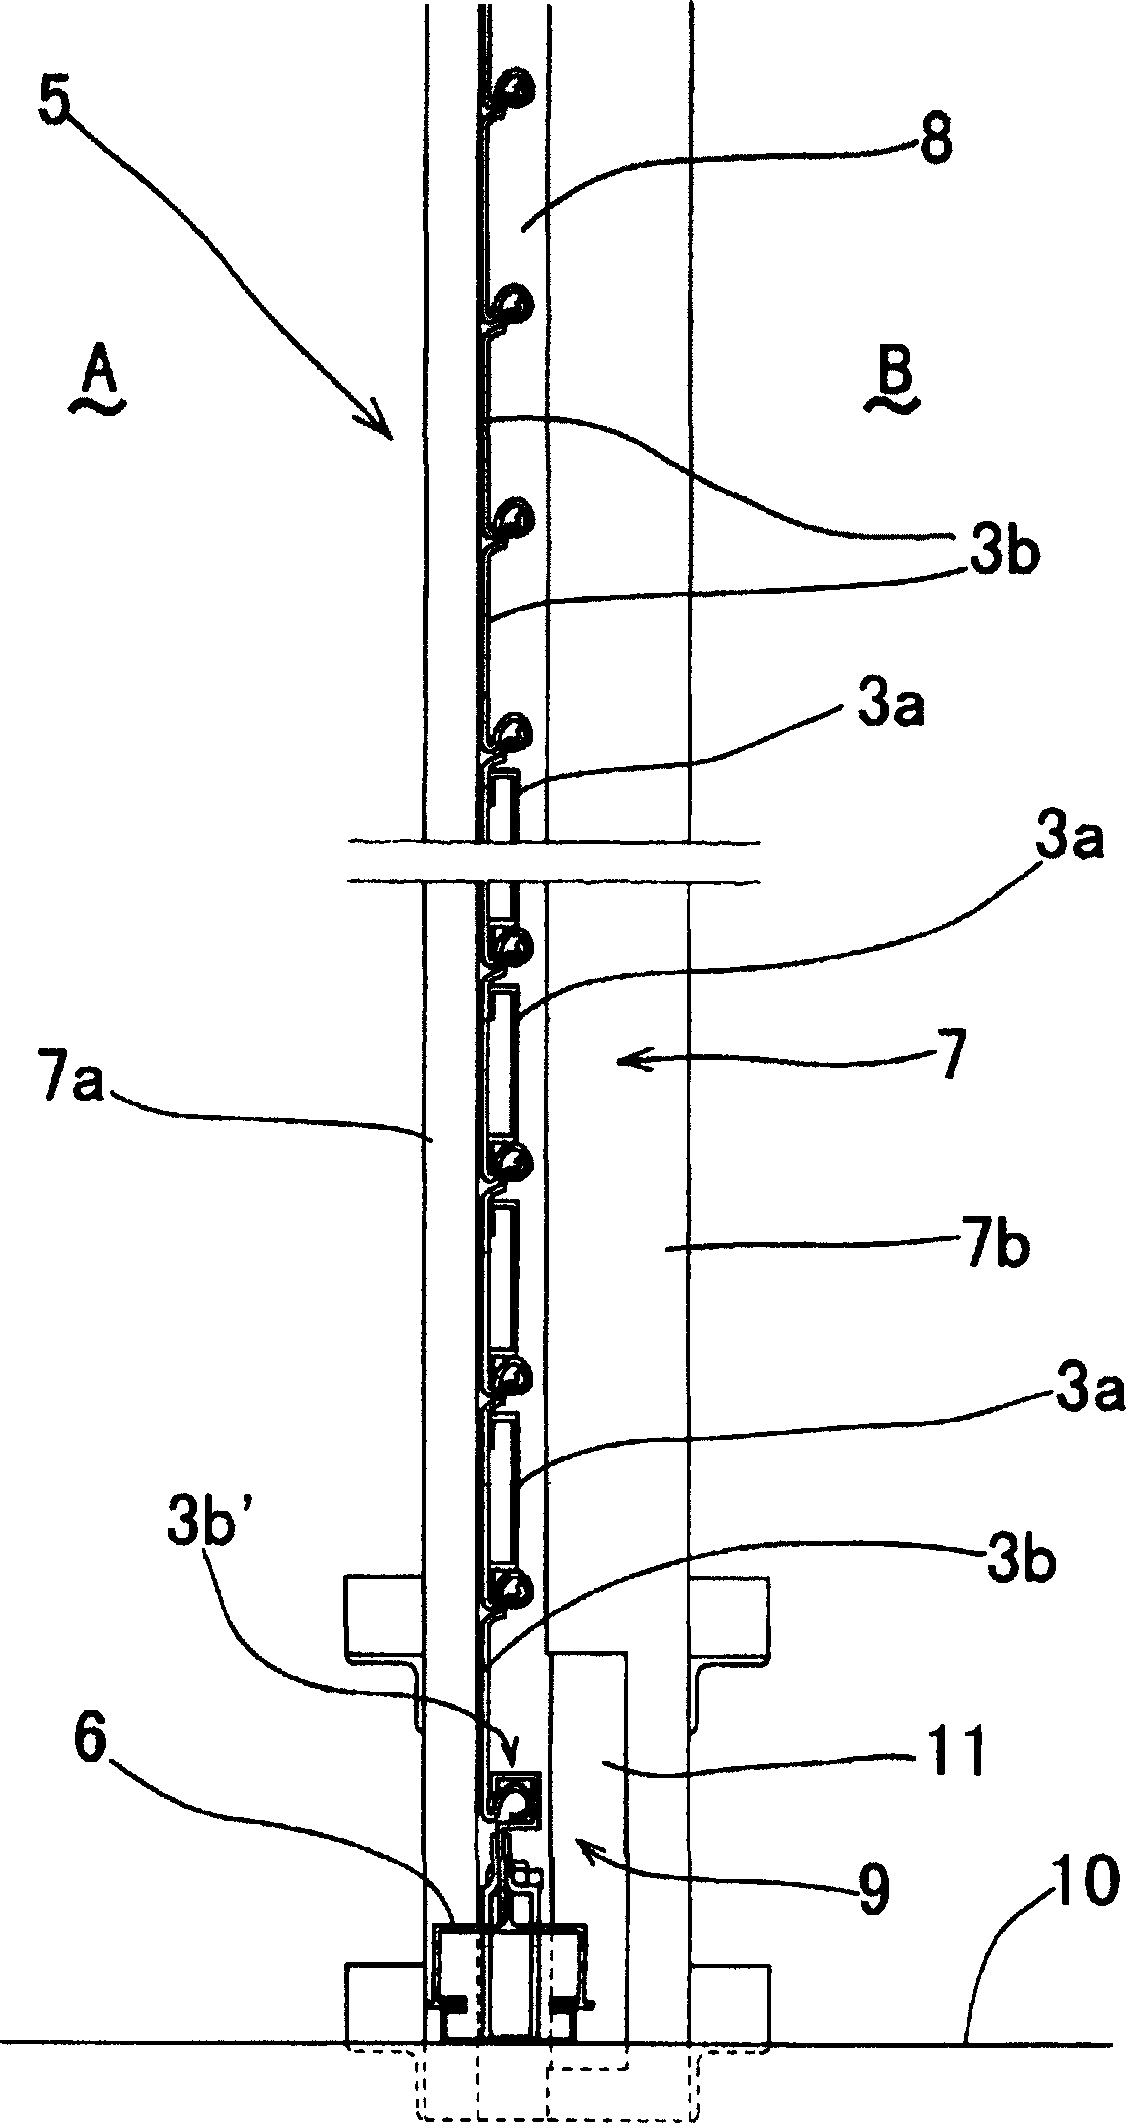 Shutter curtain lifting prevention structure in shutter device